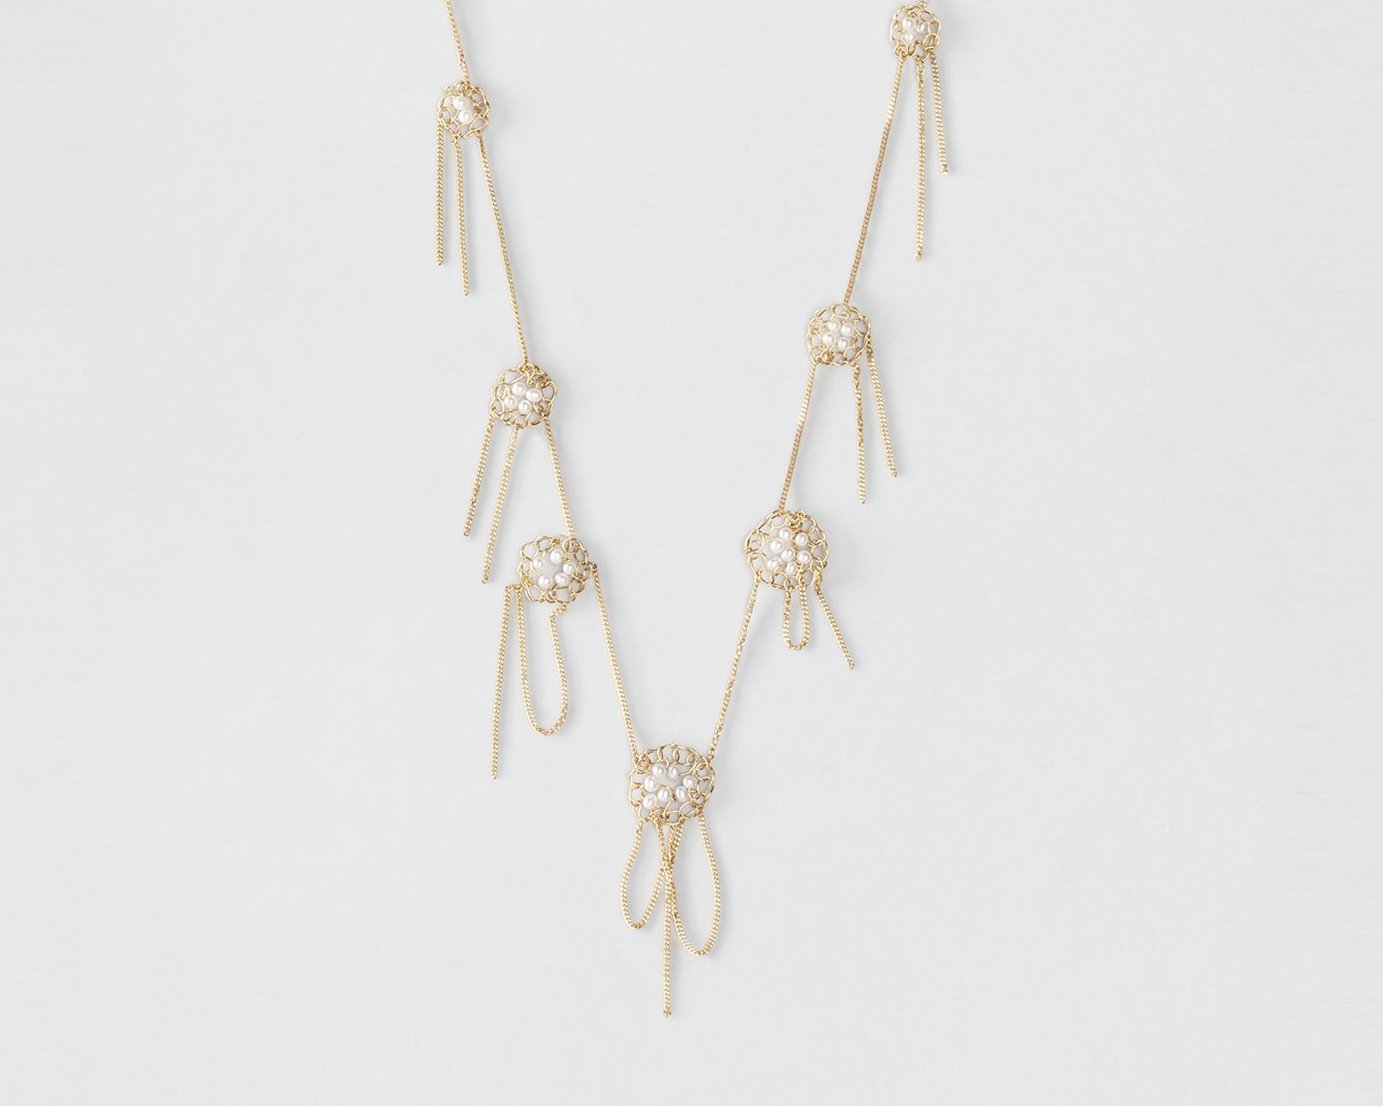 18KT yellow gold chained studs necklace with freshwater pearls - Teodolinda N